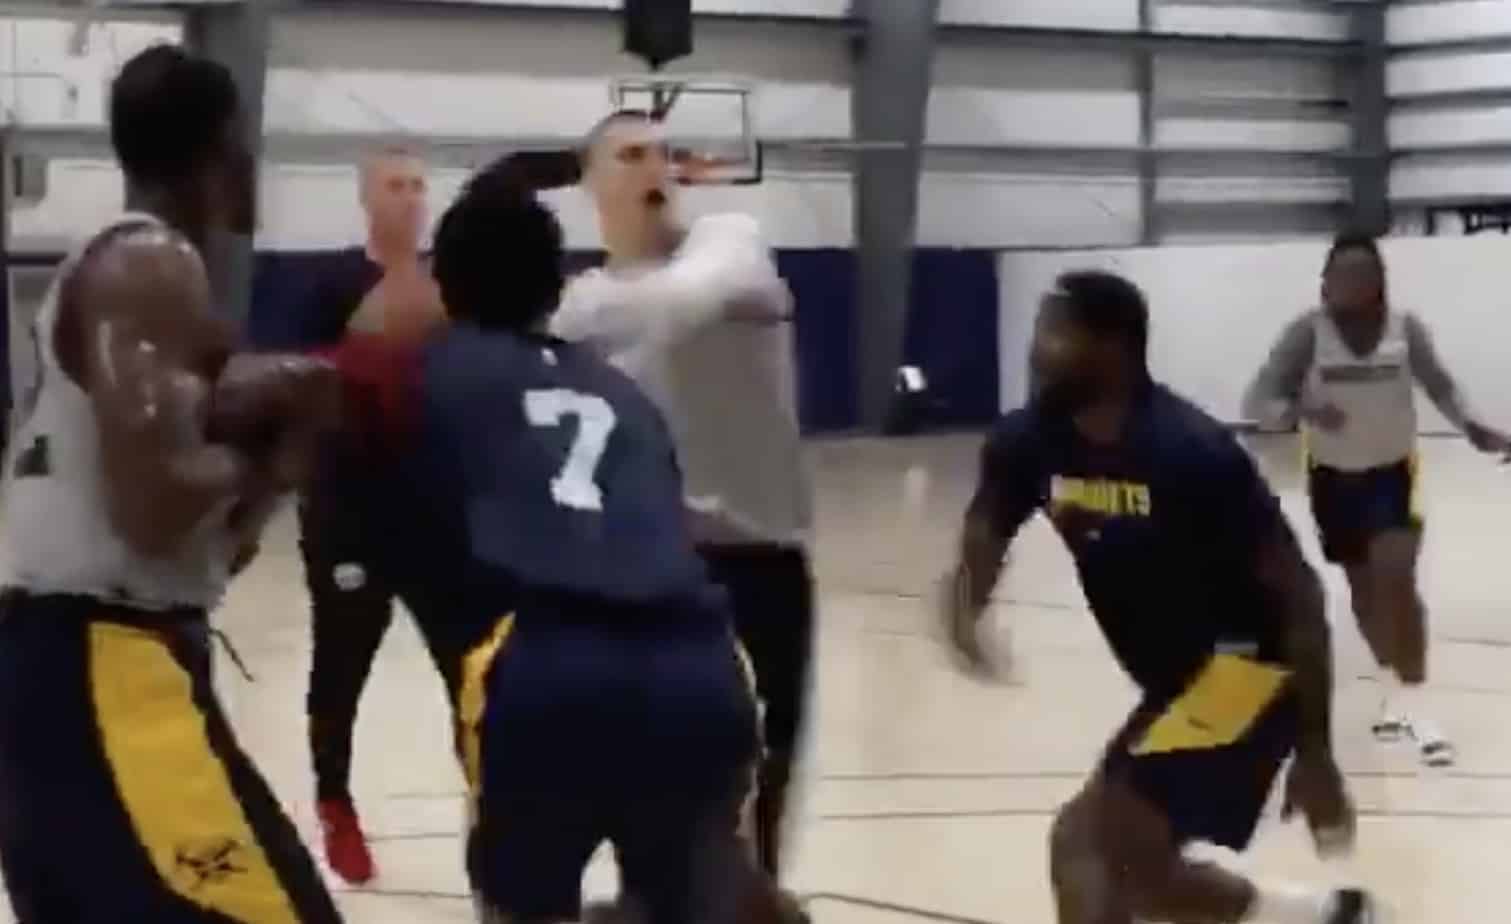 After showing off the new skinny Nikola Jokic at a basketball practice in Europe, the Nuggets star showed off some fancy new moves in Orlando